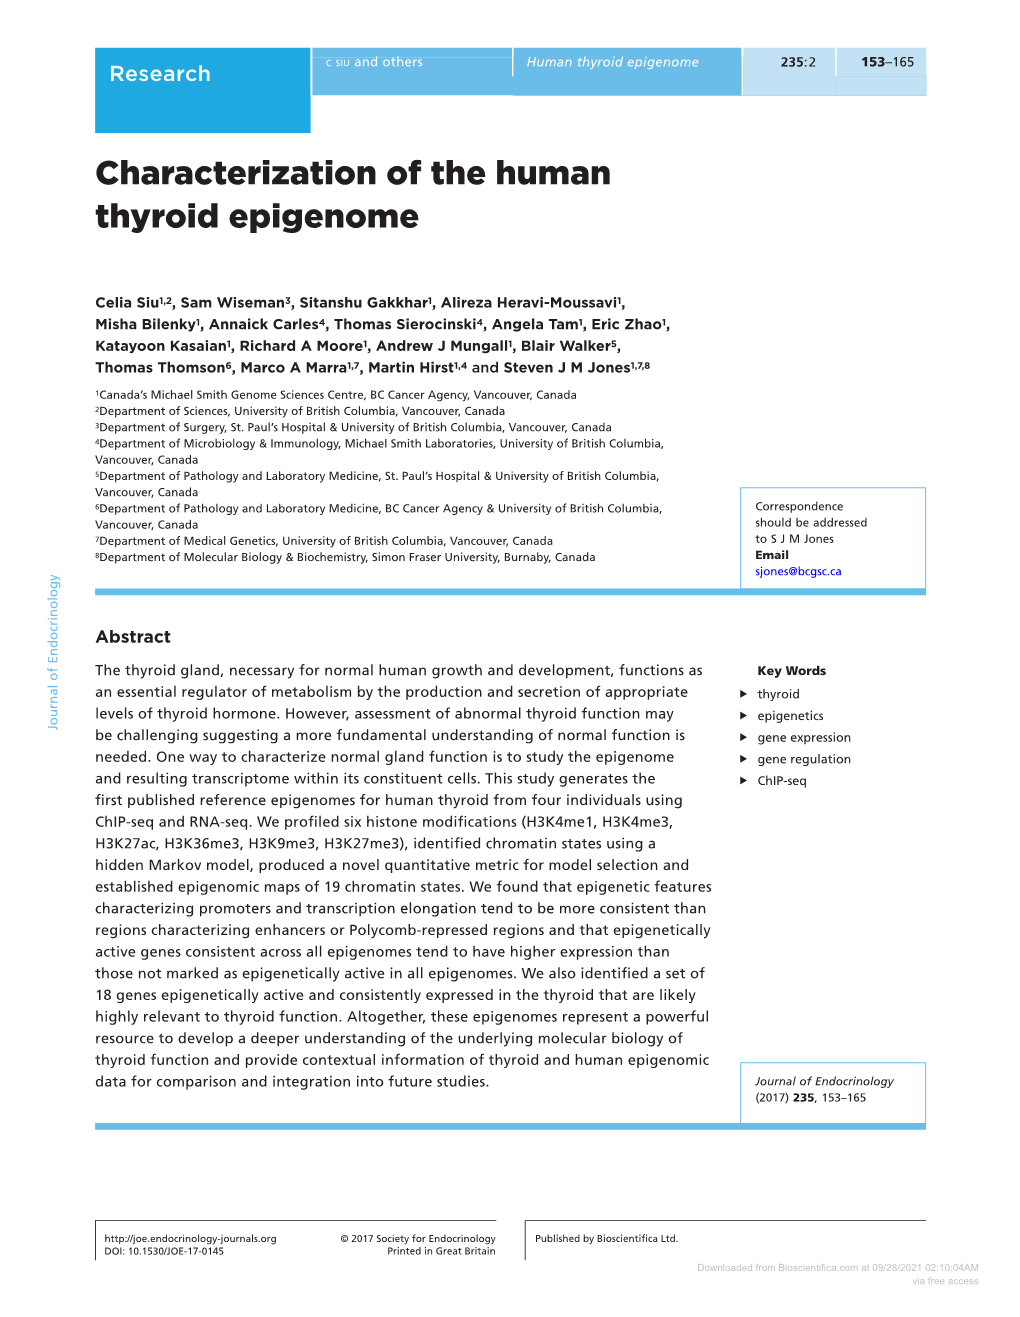 Characterization of the Human Thyroid Epigenome